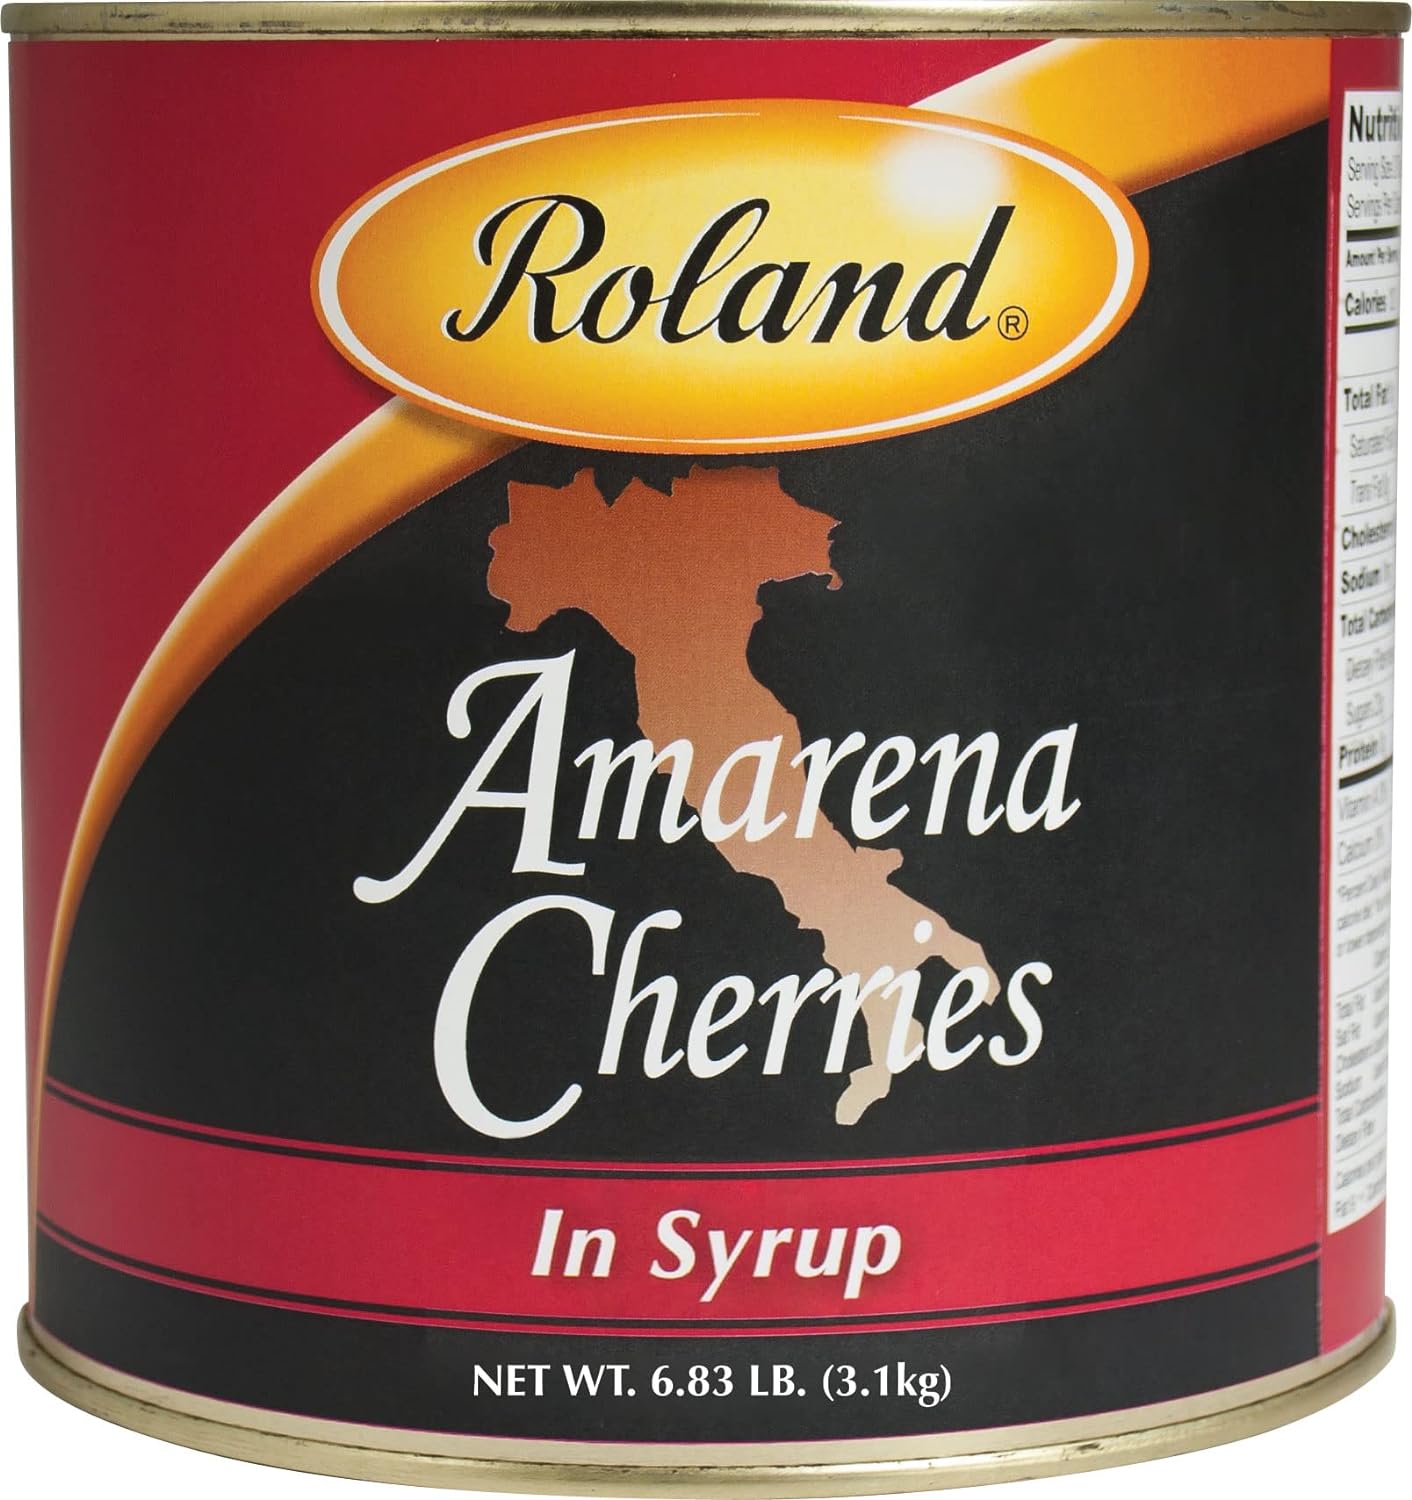 Roland Foods Amarena Cherries, In Syrup, Specialty Imported Food, 6.83 LB Can